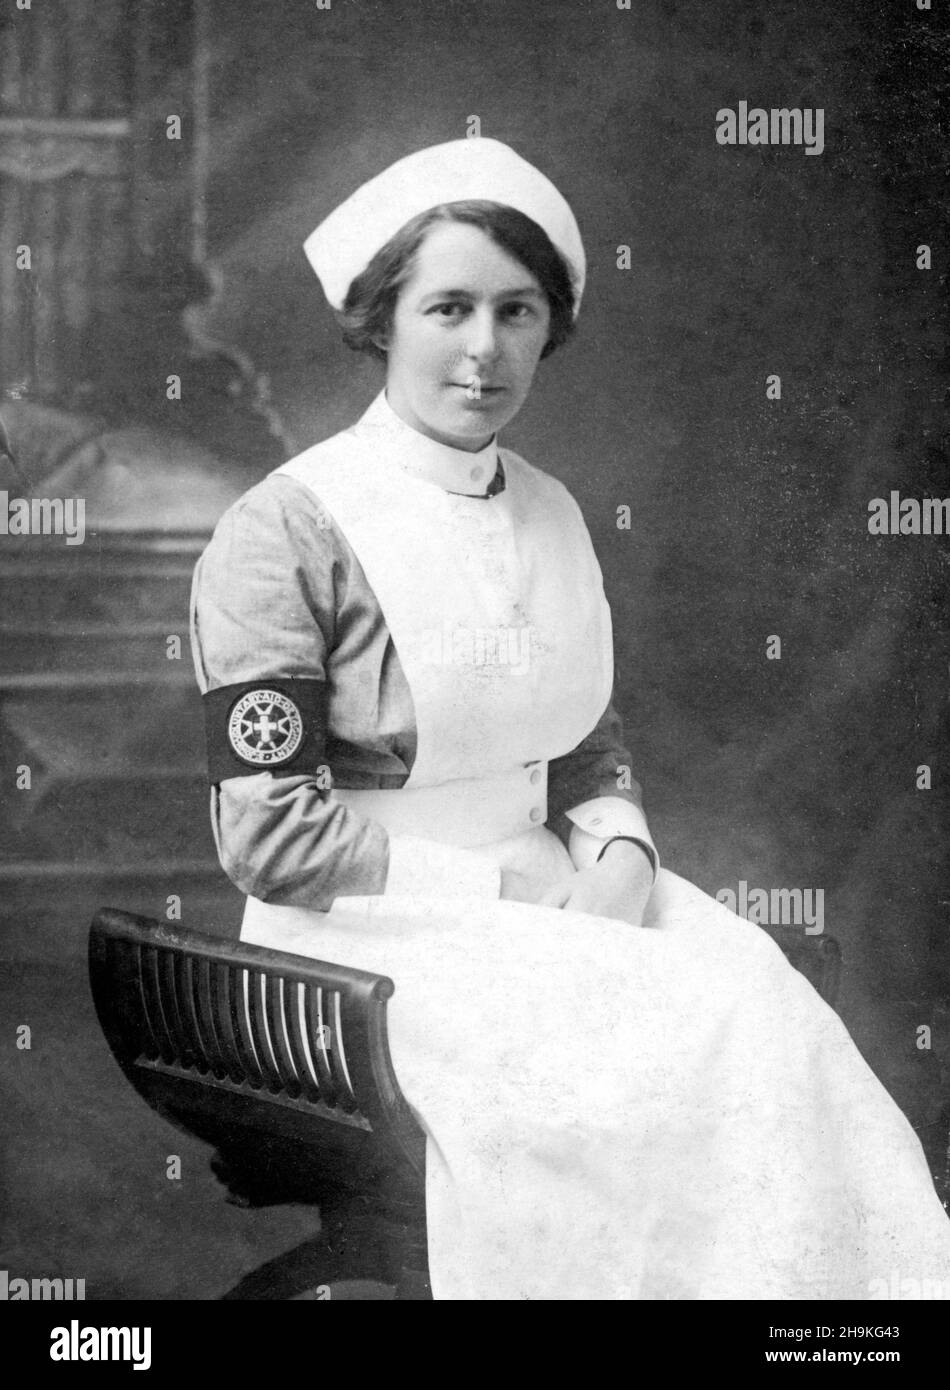 1915. Photo portrait of St John Voluntary Aid Detachment (VAD) nurse Isabel Dagwell. She served between 1915-1918 as part of the British Army's territorial medical services in France. Stock Photo